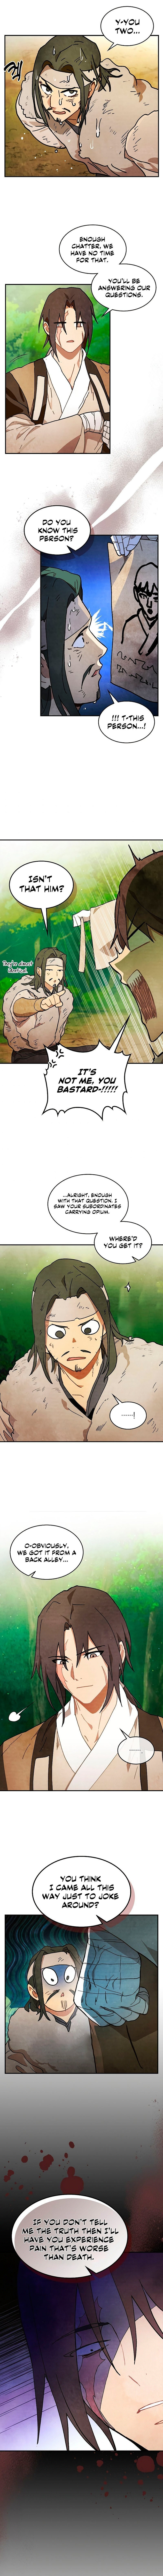 chronicles-of-the-martial-gods-return-chap-31-4